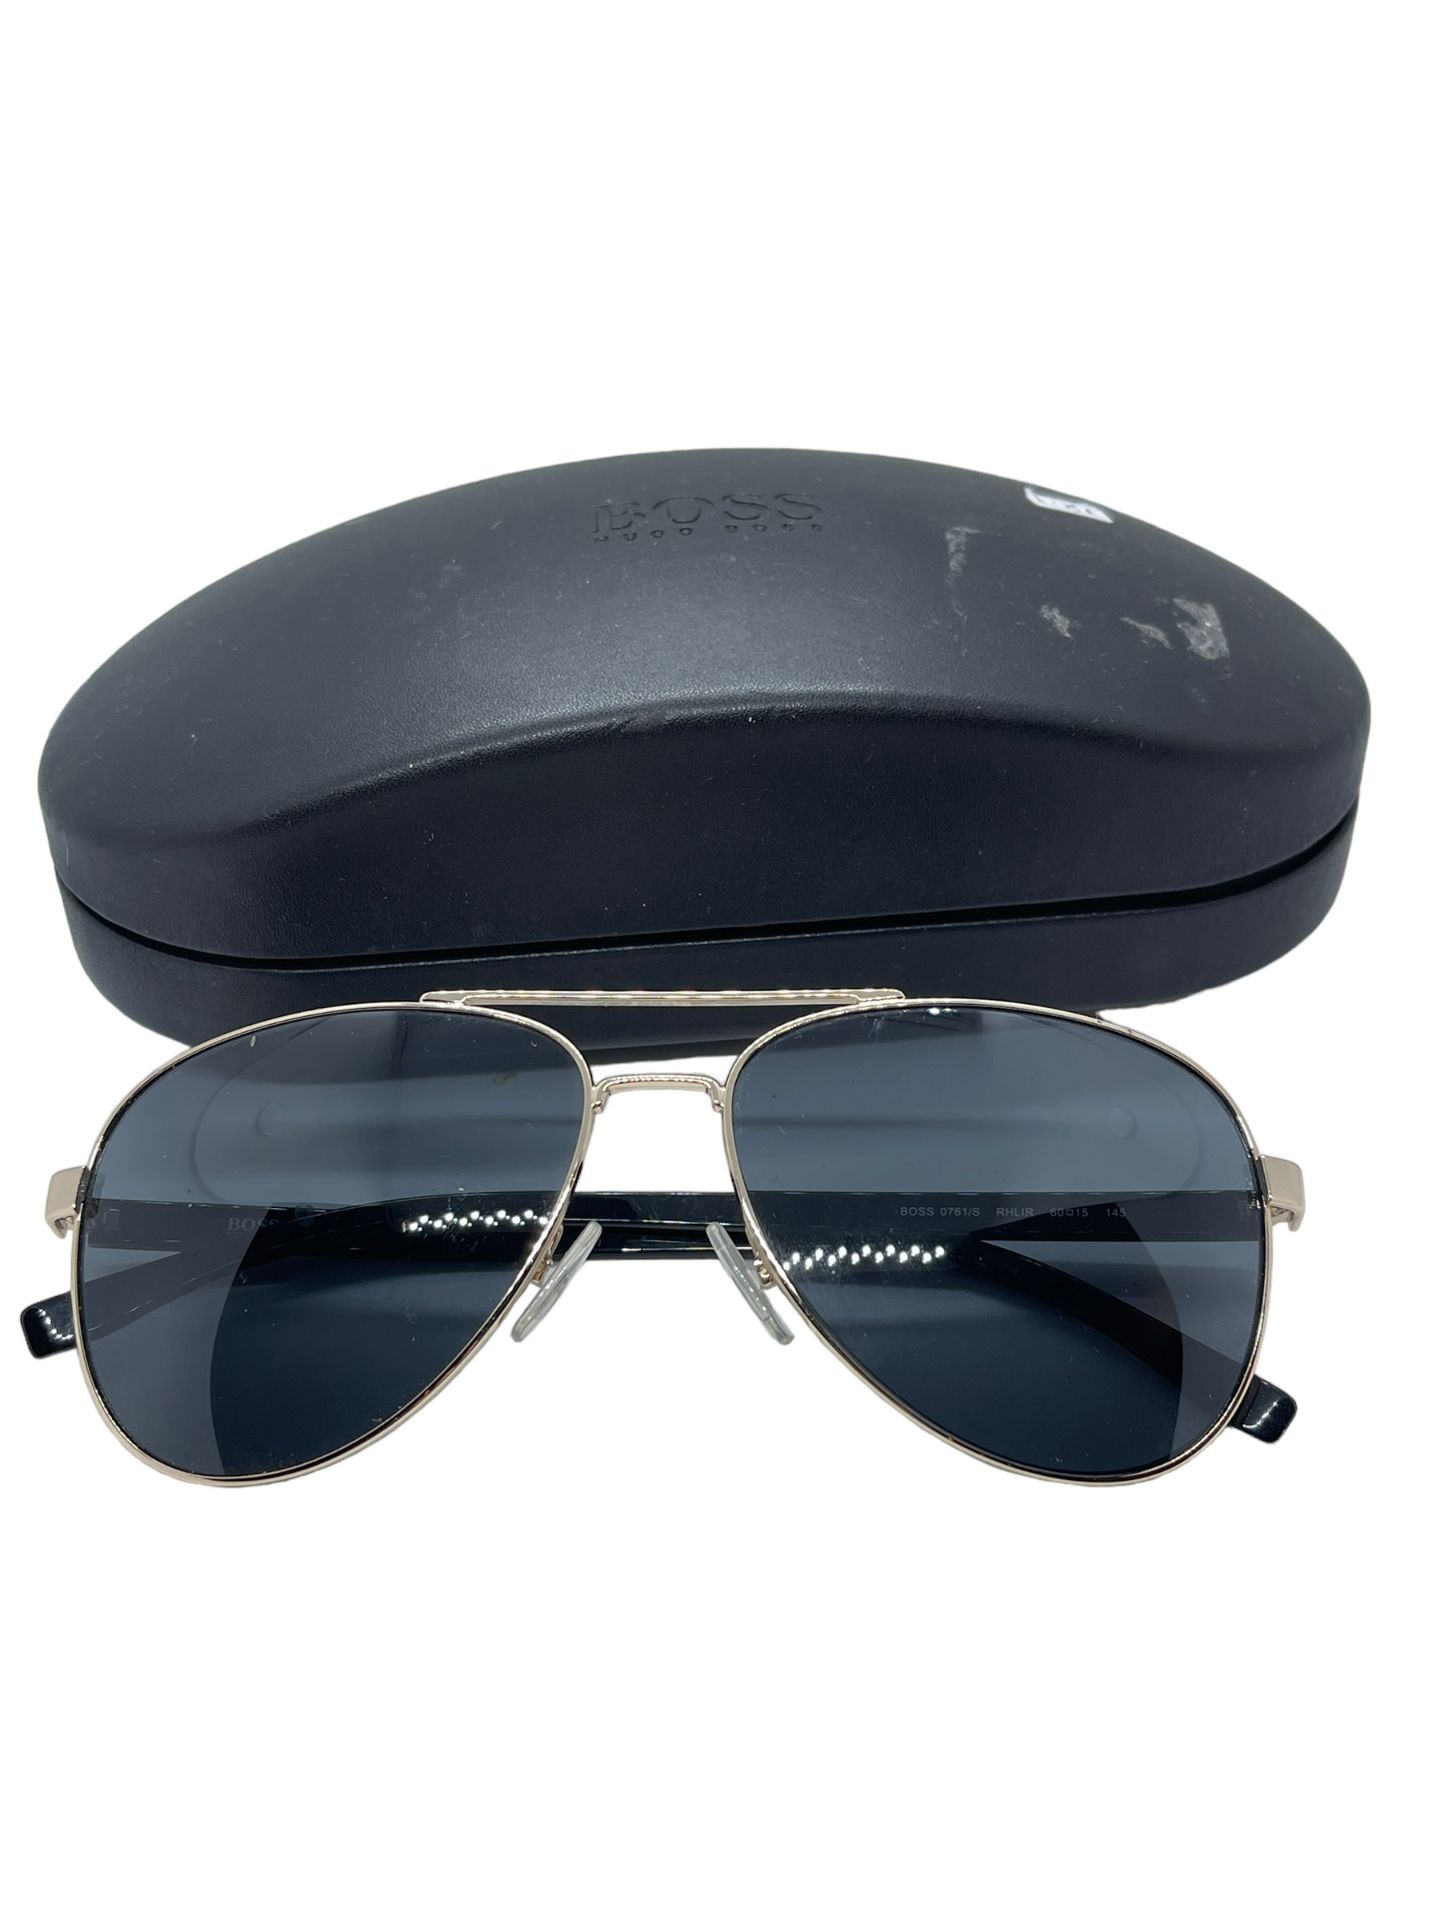 Hugo Boss Sunglasses gold plated aviators with case surplus stock xdemo - Image 4 of 6